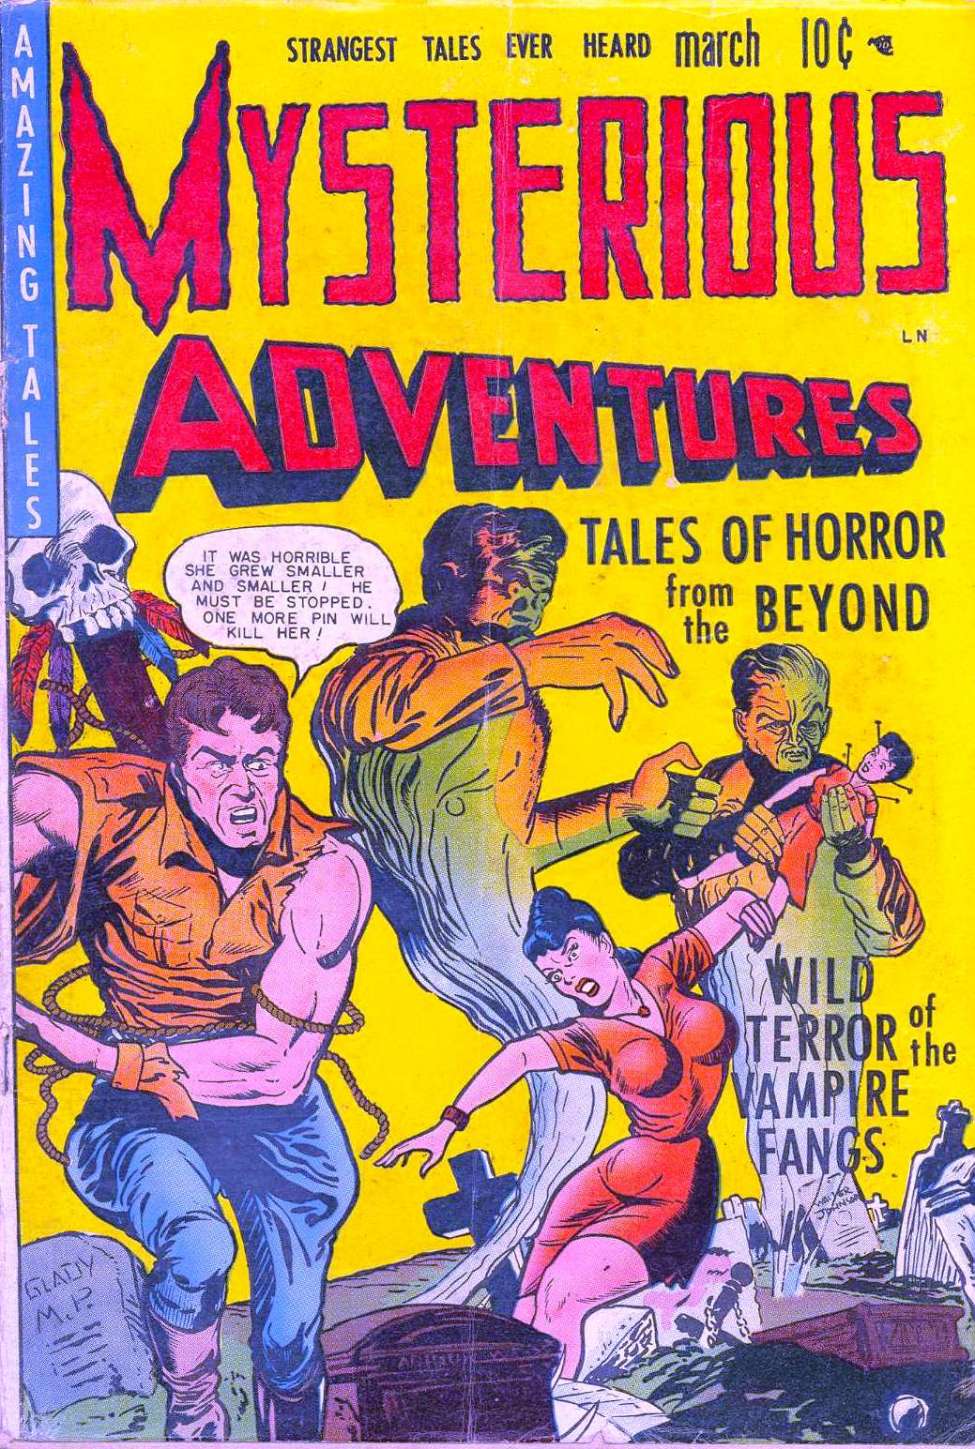 Book Cover For Mysterious Adventures 1 - Version 1